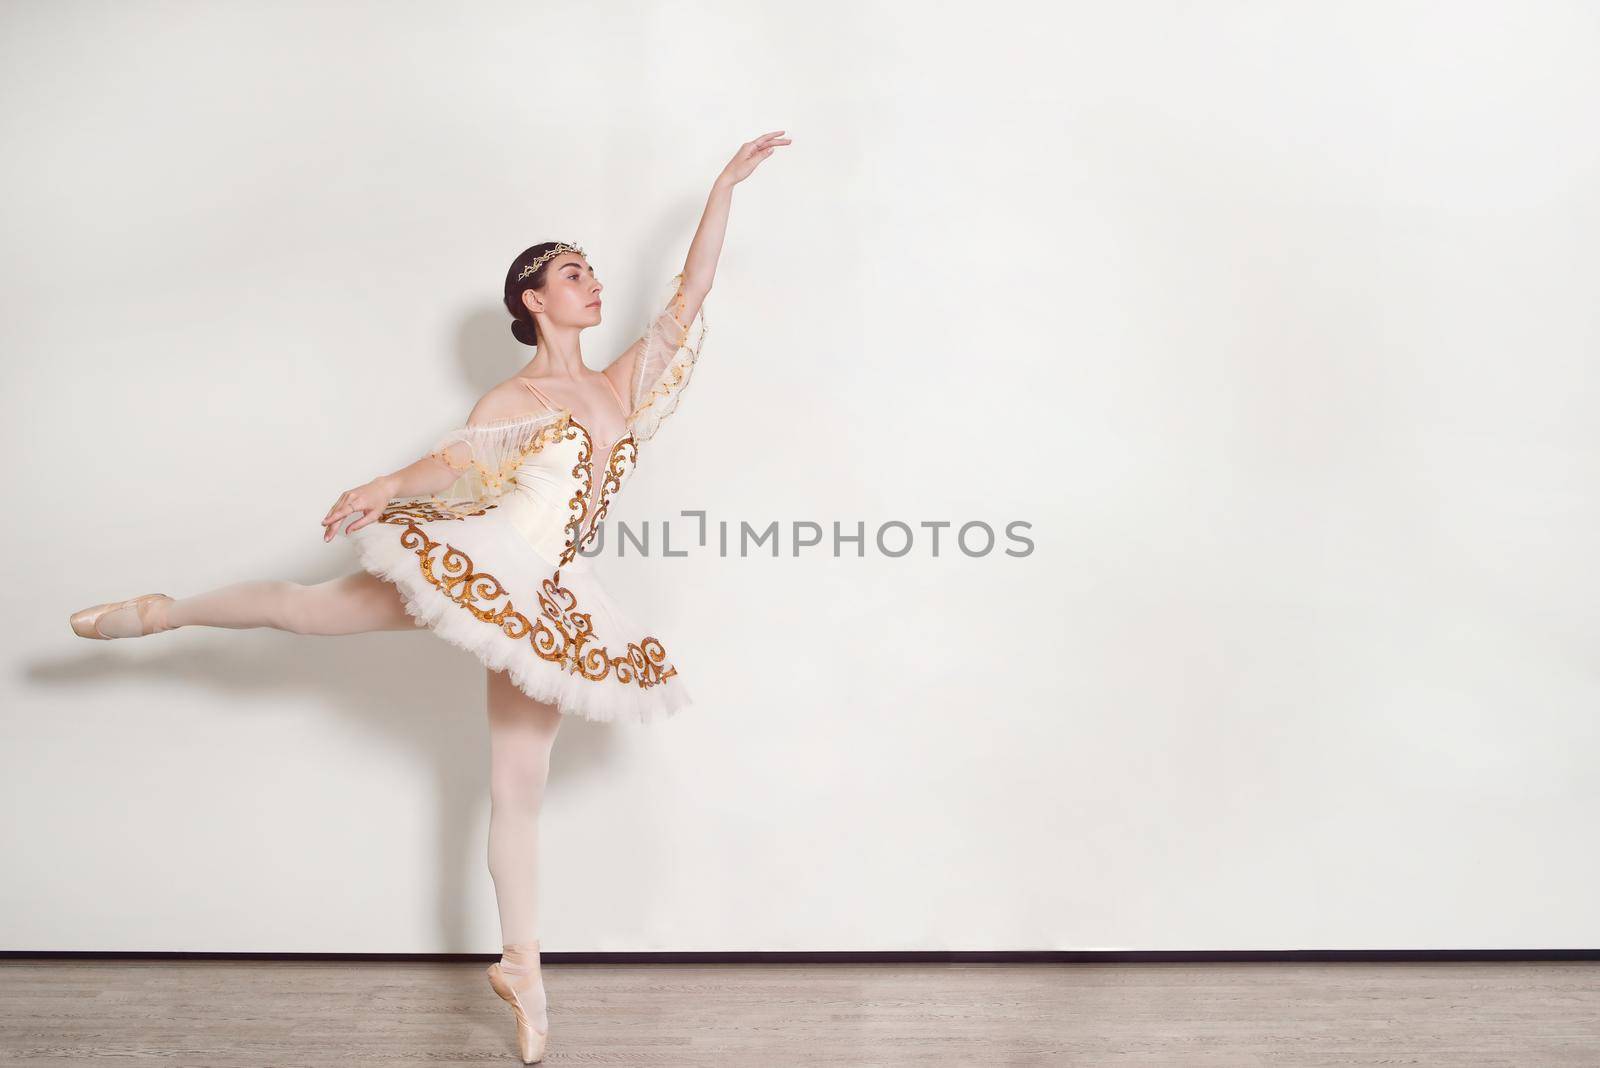 pretty ballerina performs ballet exercises in the studio against a white background